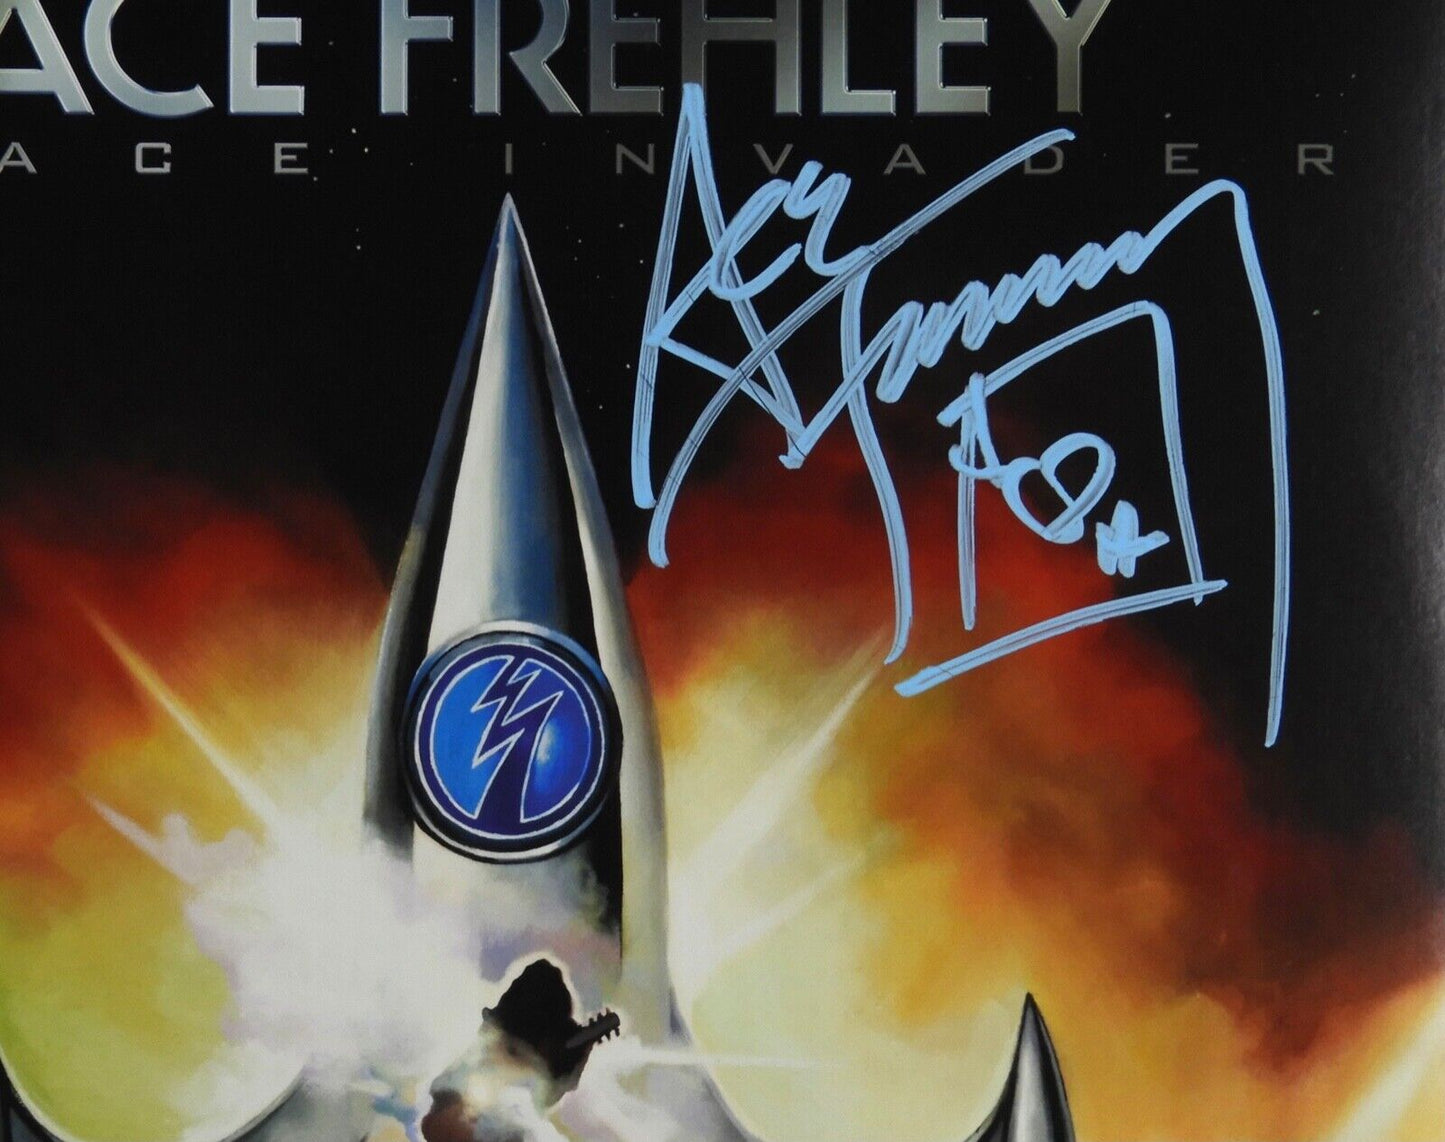 KISS JSA Ace Frehley Autograph Signed Record Album Space Invaders Vinyl